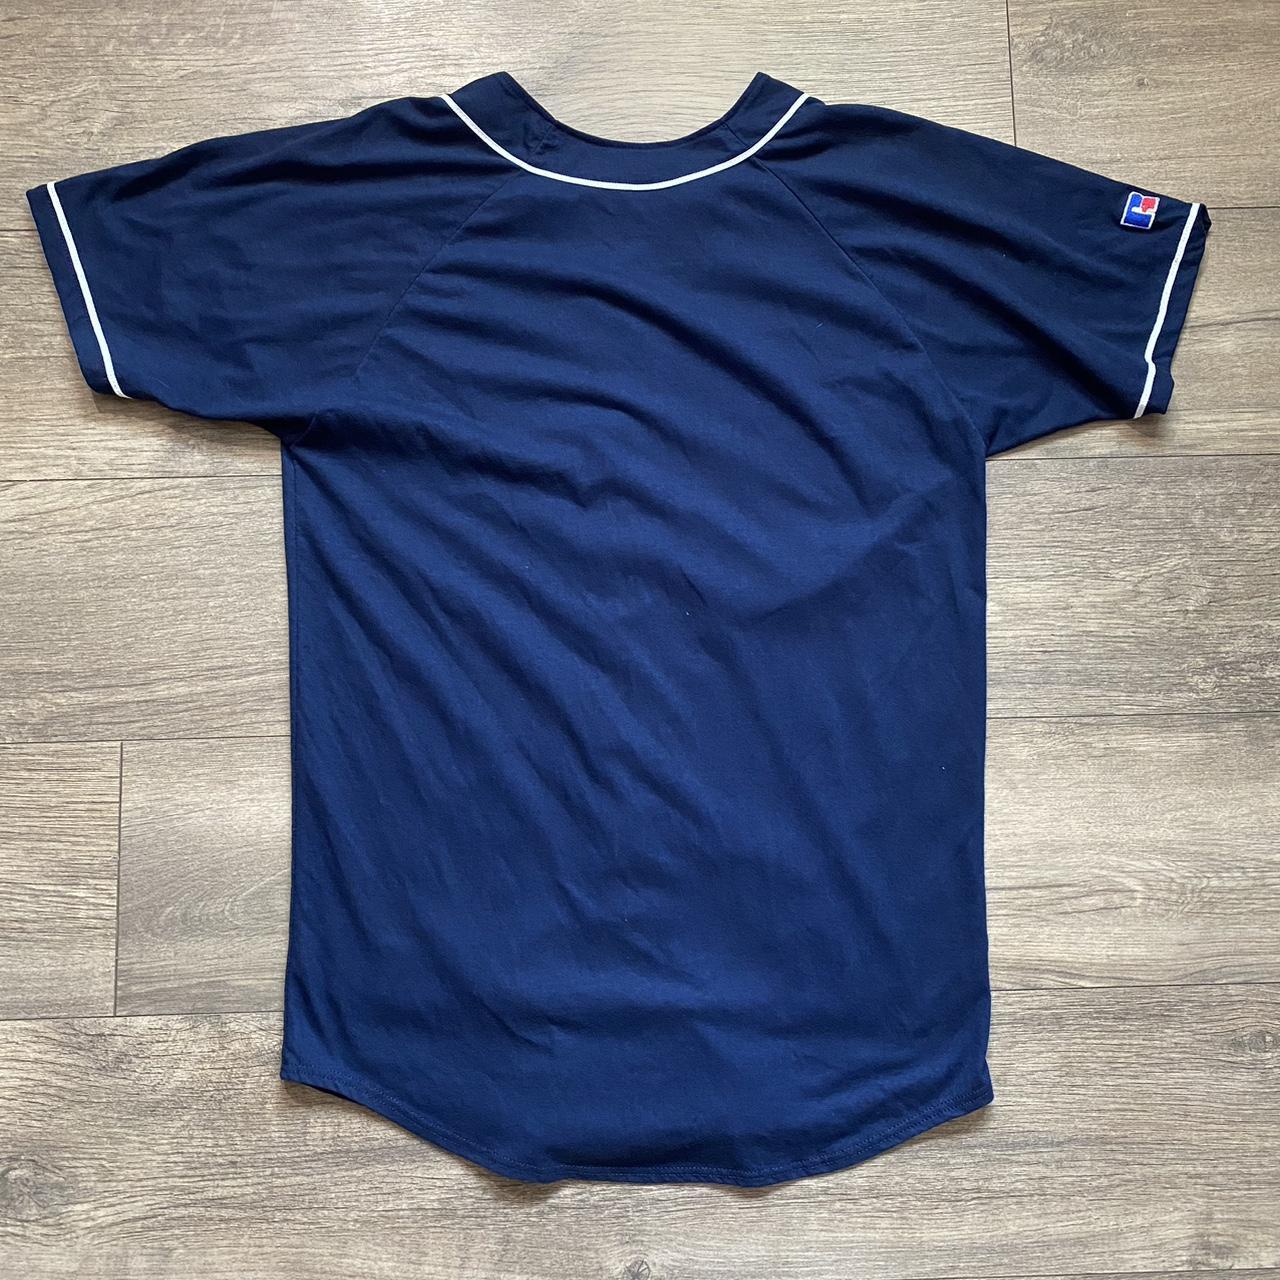 0142 Russell Athletic Vintage Padres Jersey – PAUL'S FANSHOP